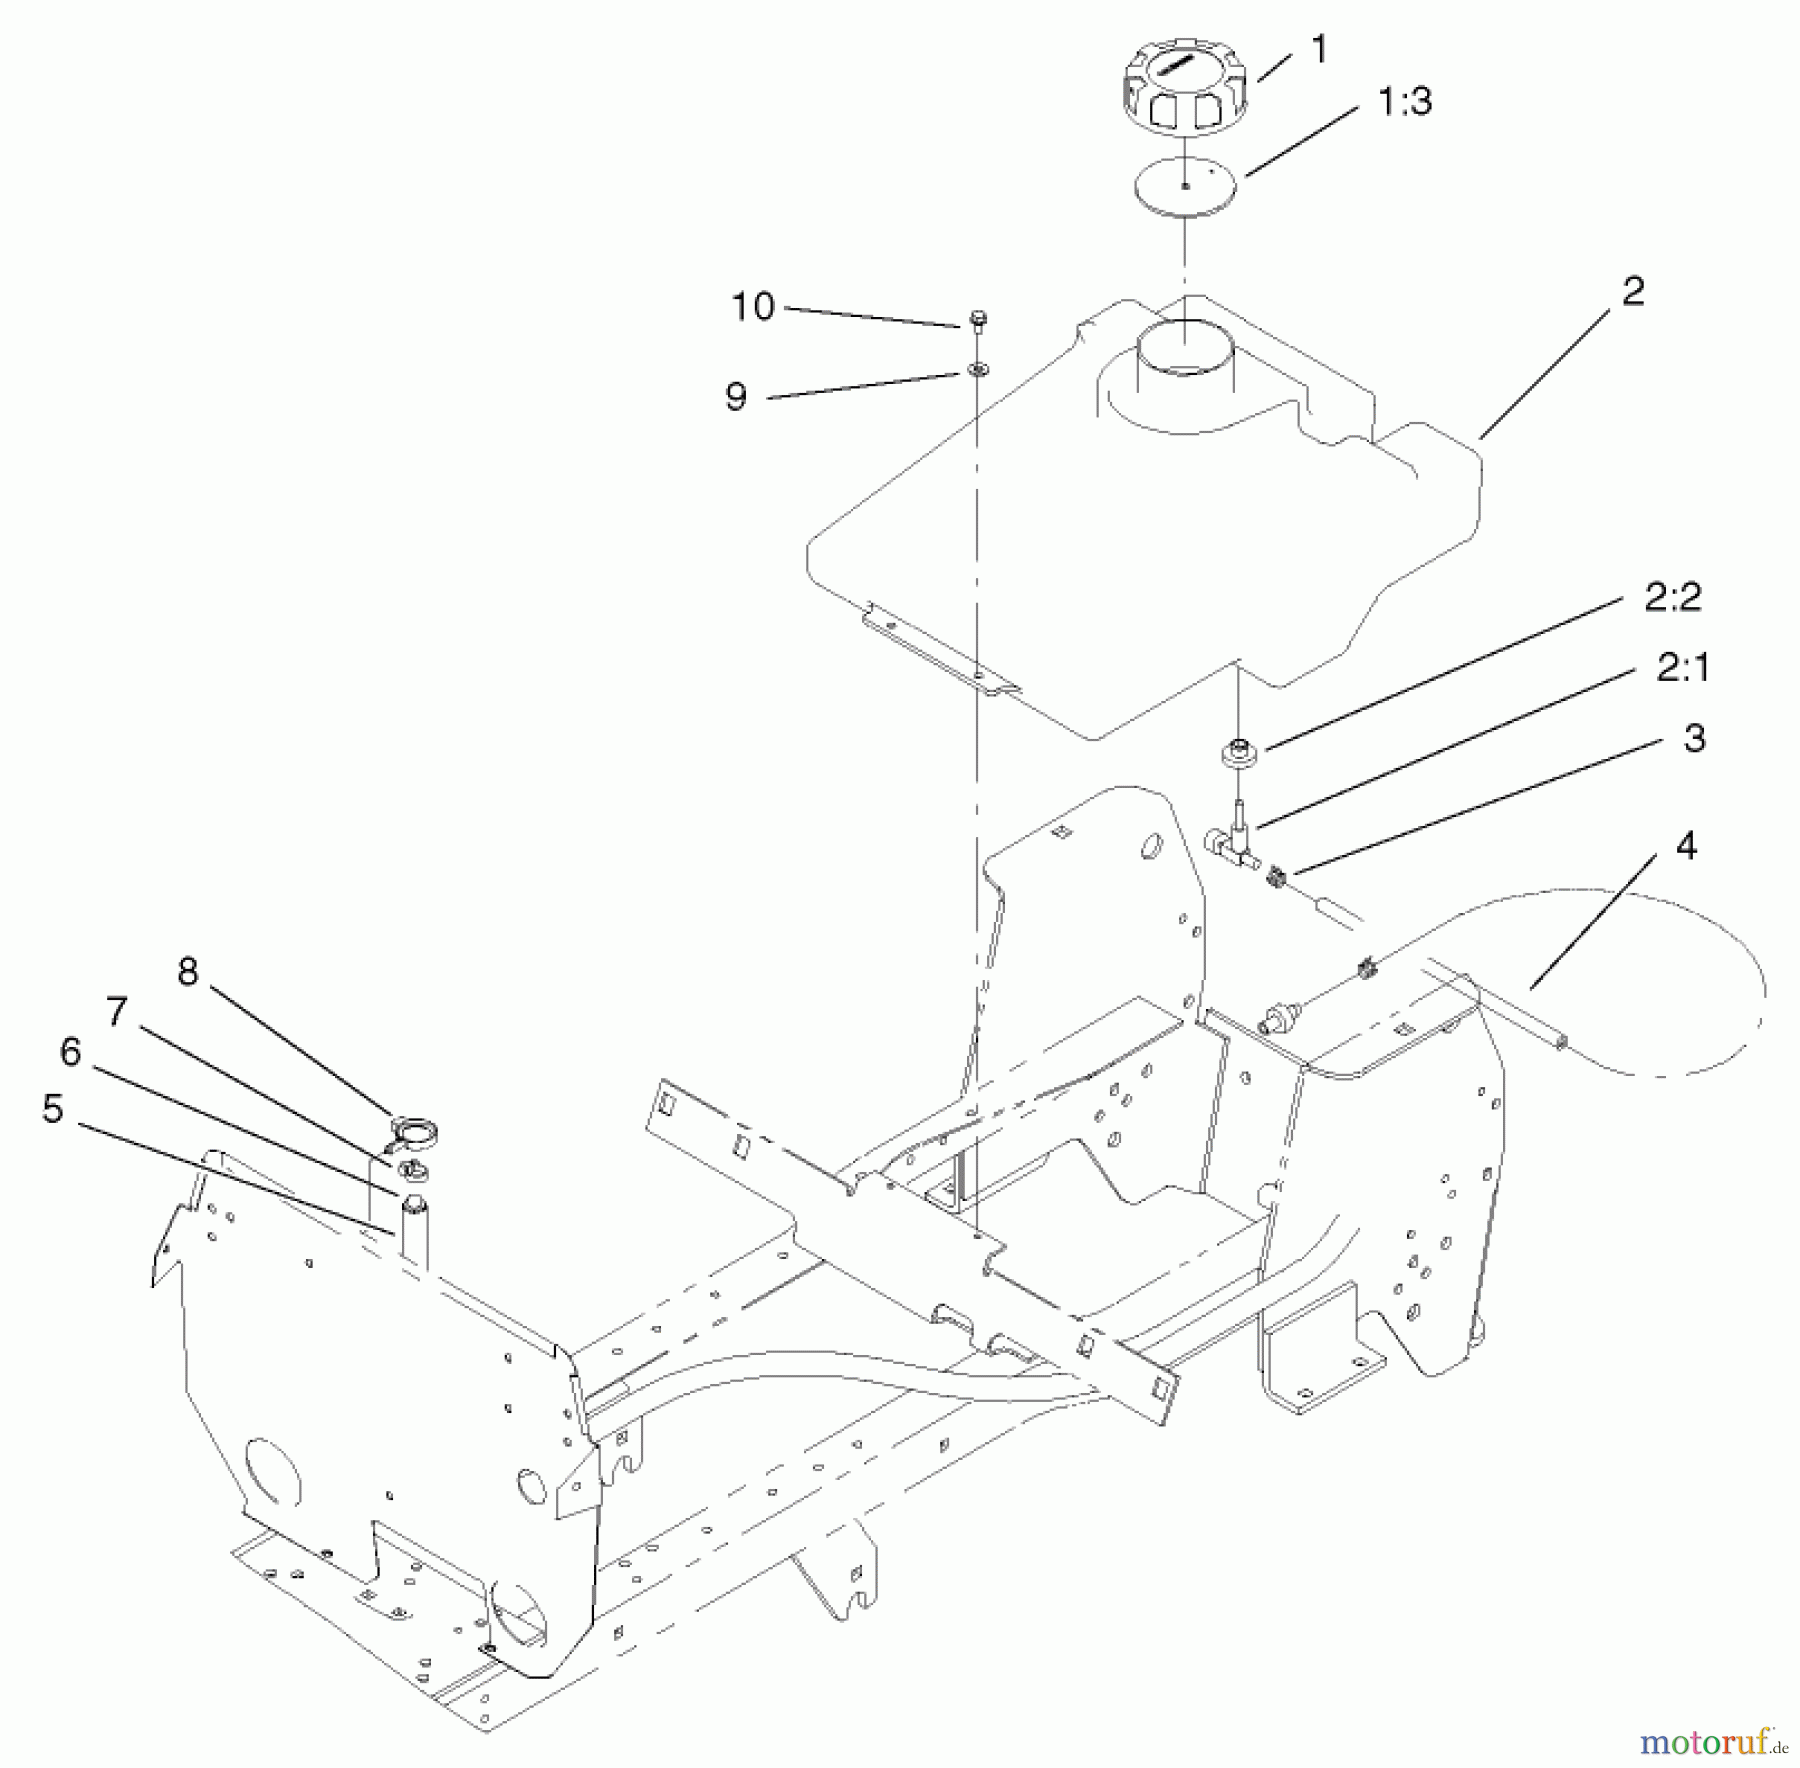  Toro Neu Mowers, Lawn & Garden Tractor Seite 1 72087 (268-H) - Toro 268-H Lawn and Garden Tractor, 2002 (220000001-220999999) FUEL TANK ASSEMBLY